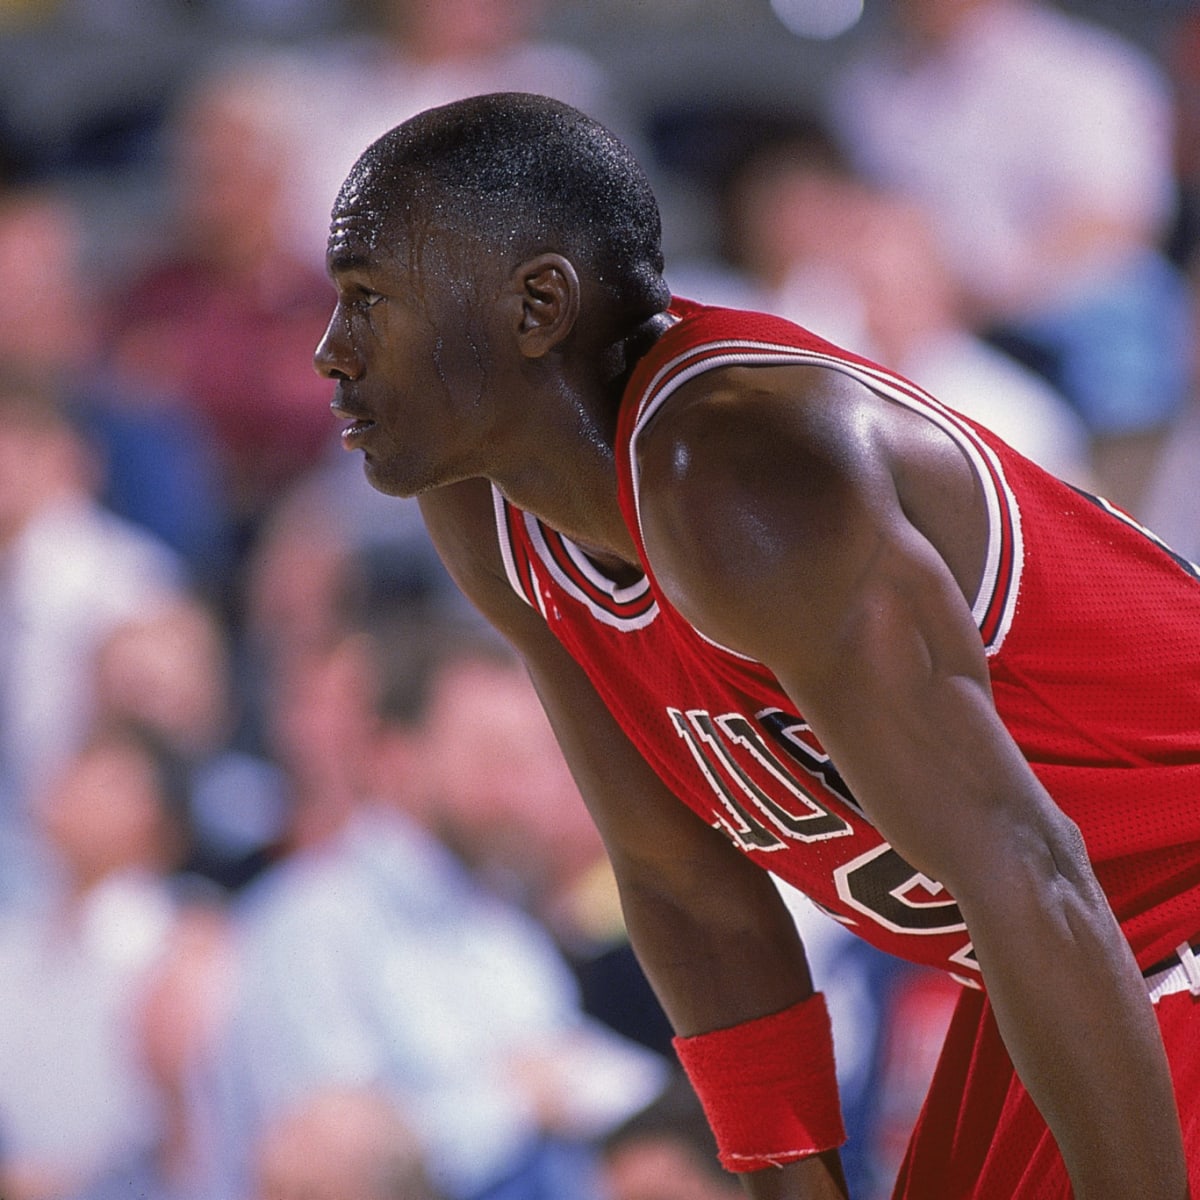 Michael Jordan, Chicago Bull in a game against New Jersey Nets in